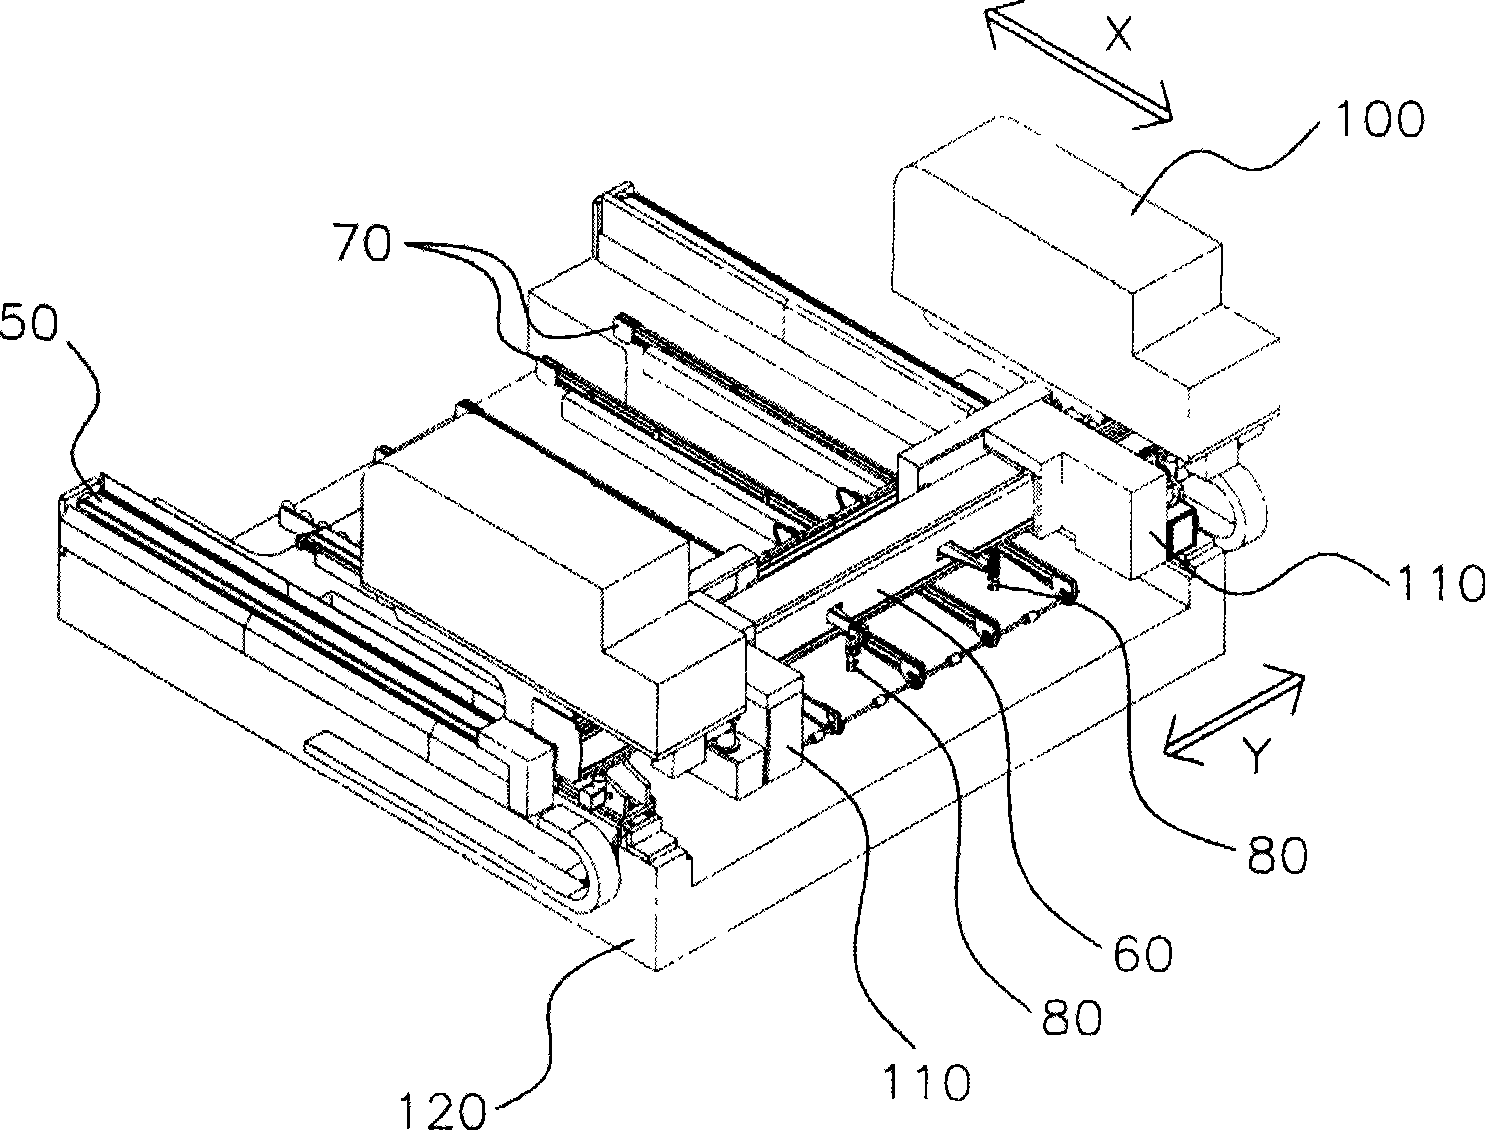 Glass substrate laser cutting apparatus